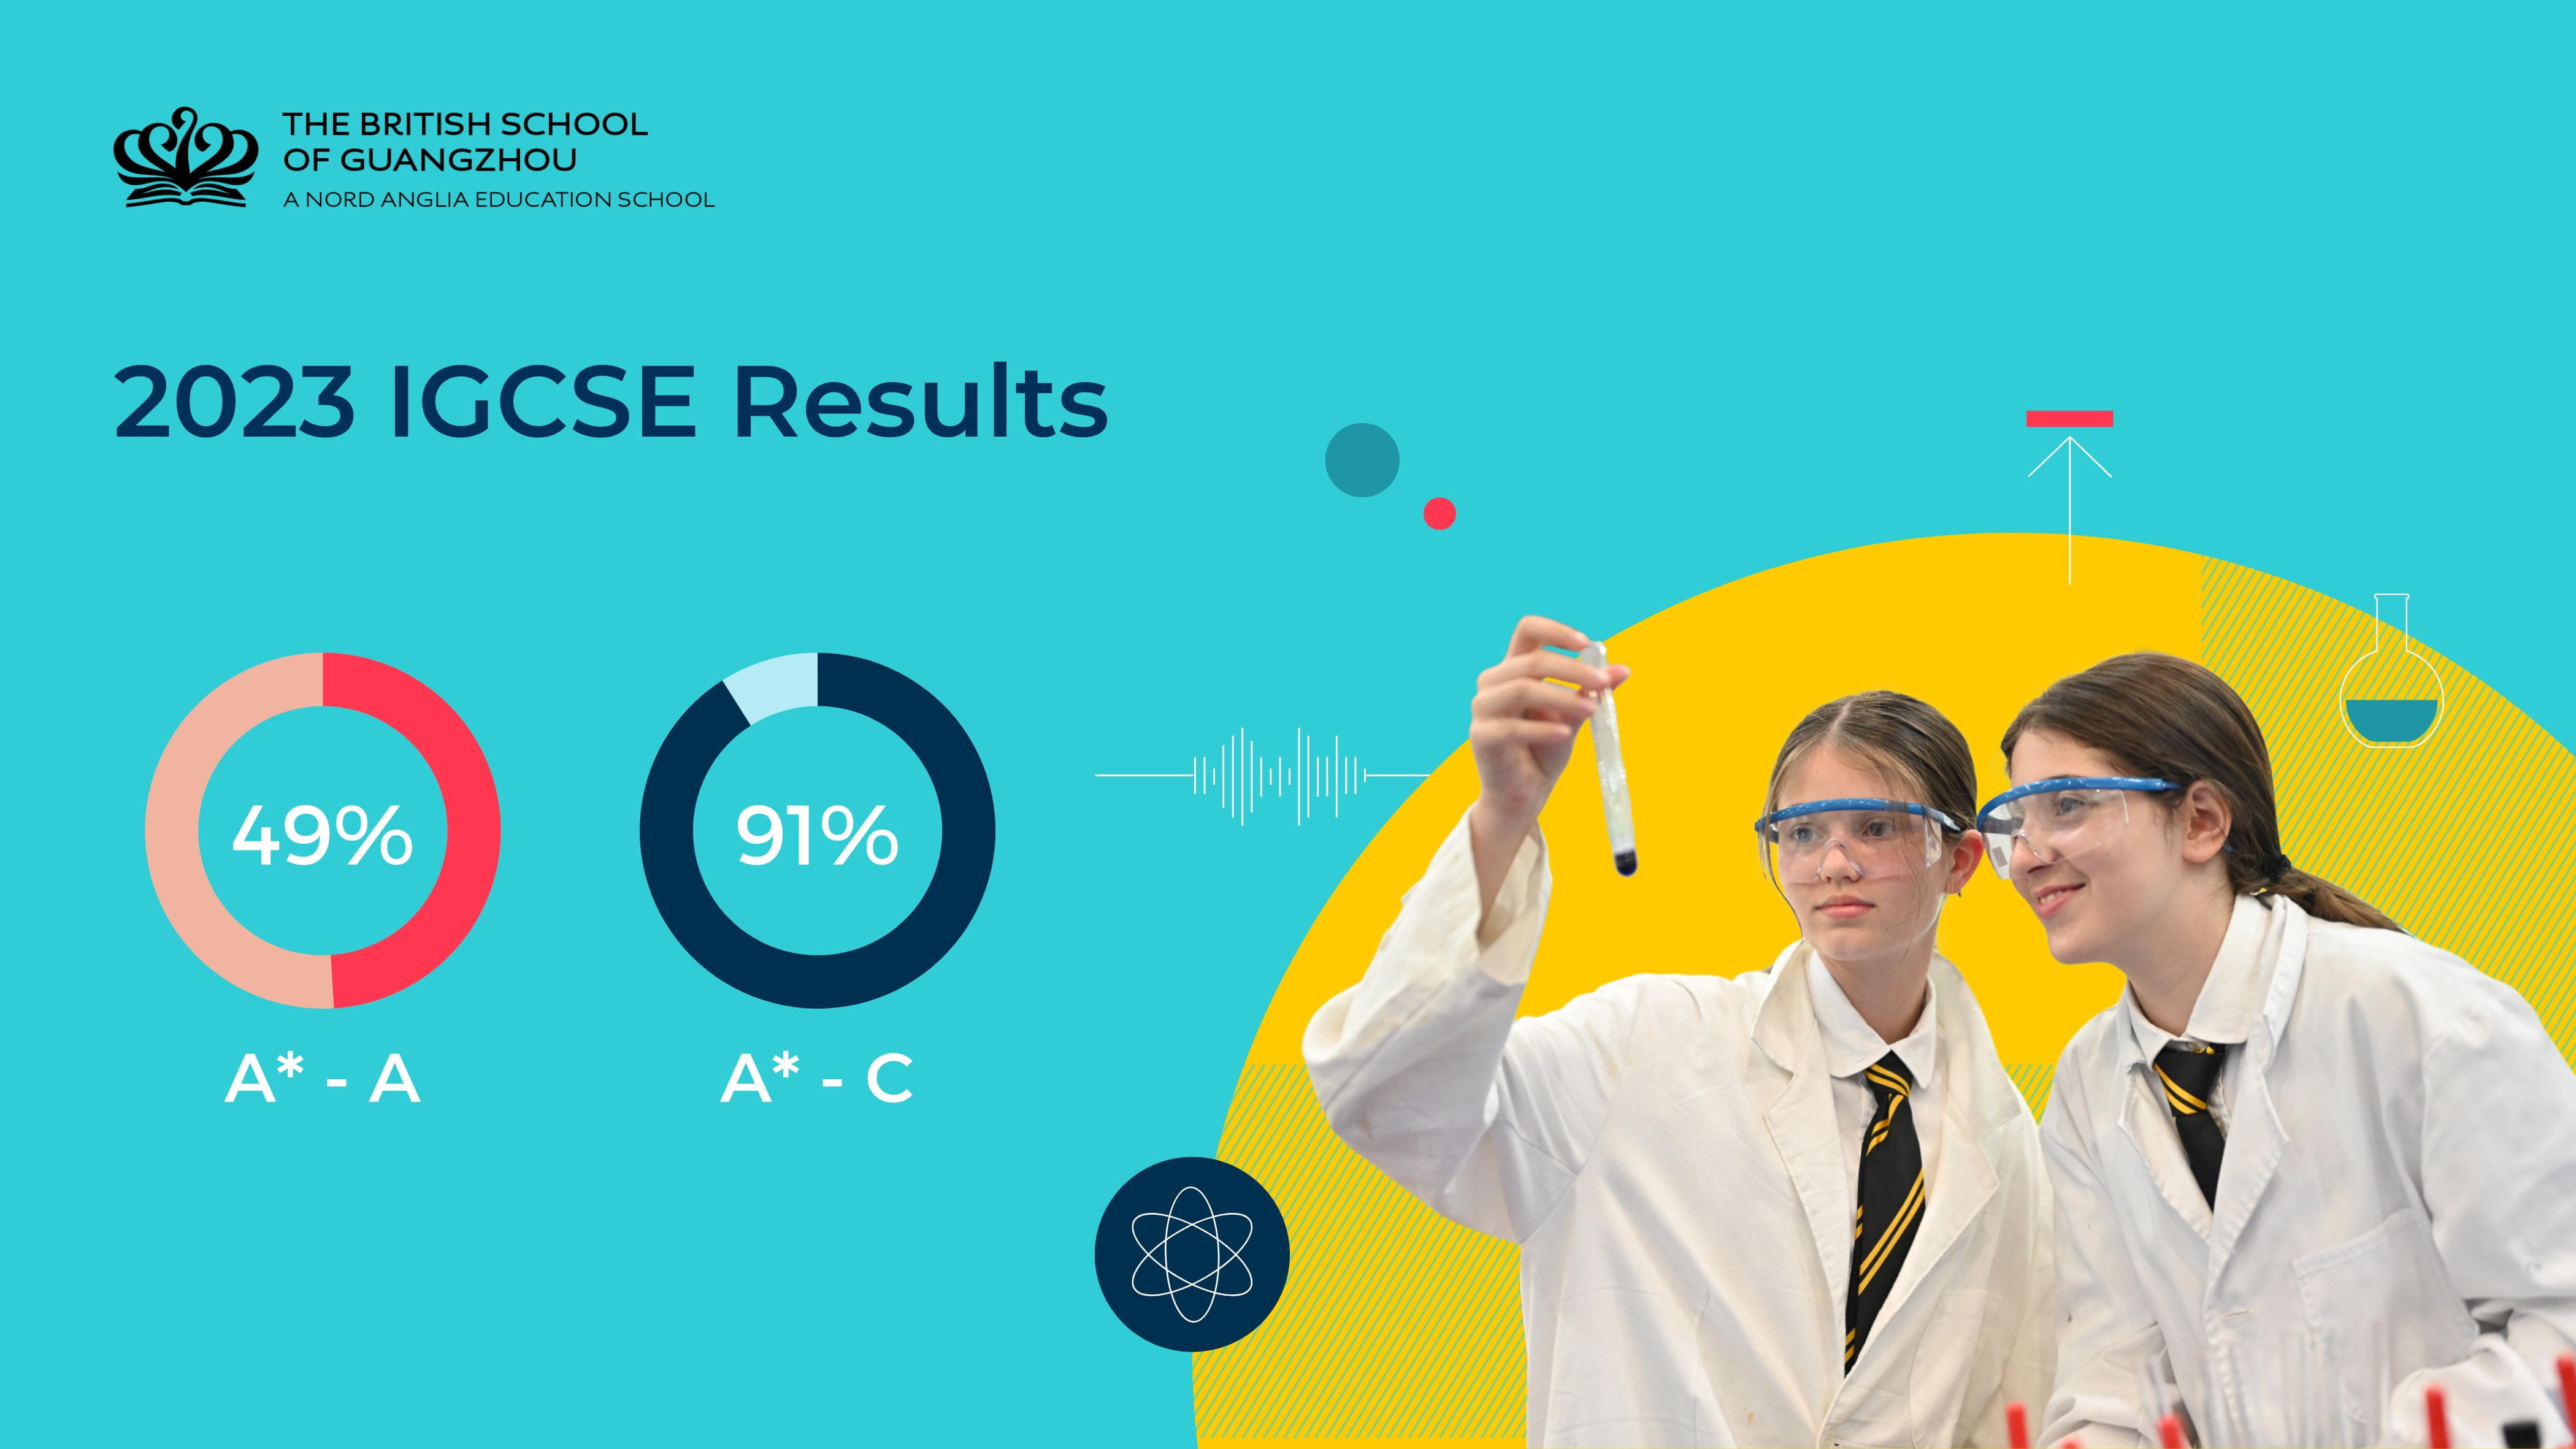 Outstanding IGCSE results at the British School of Guangzhou - Outstanding IGCSE results at the British School of Guangzhou